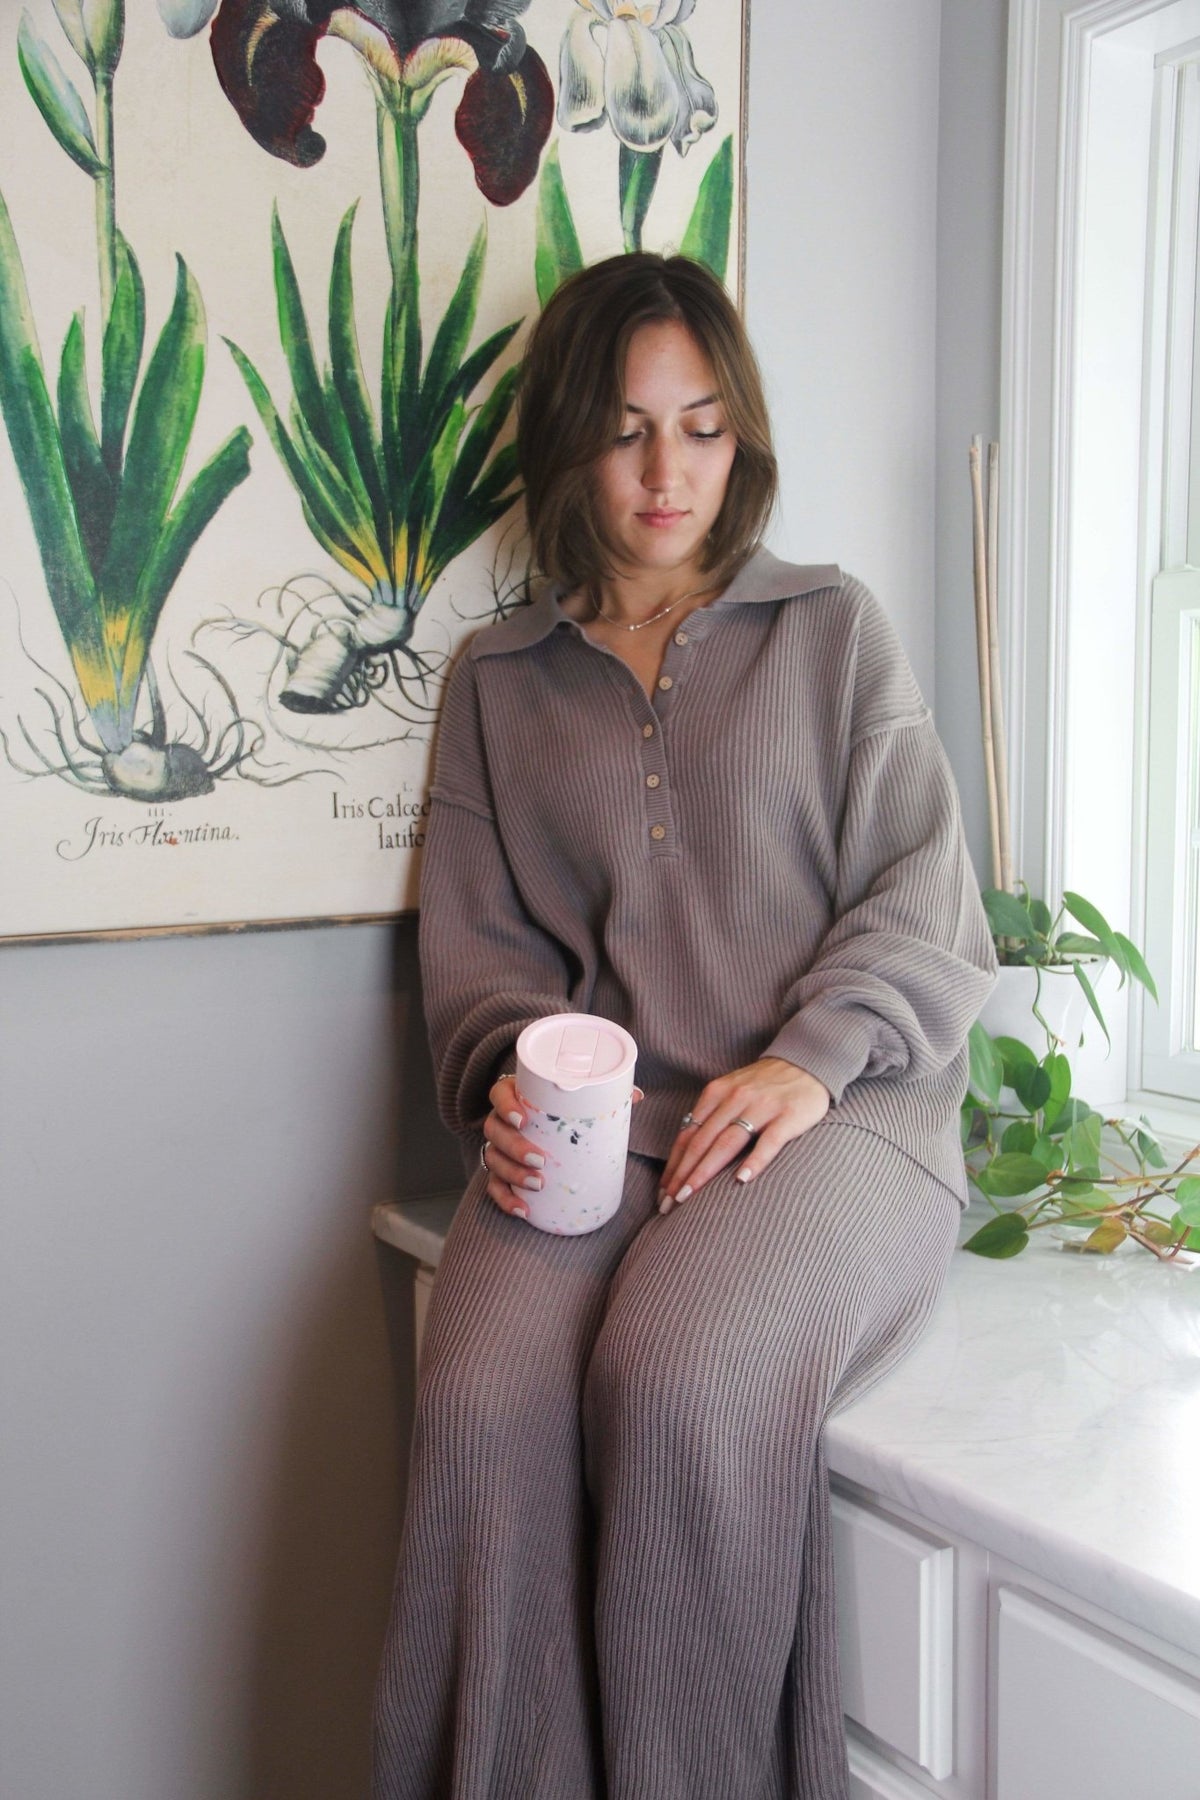 Favorite Rib Knit Lounge Set - Outfit Sets - The Calm and Collected